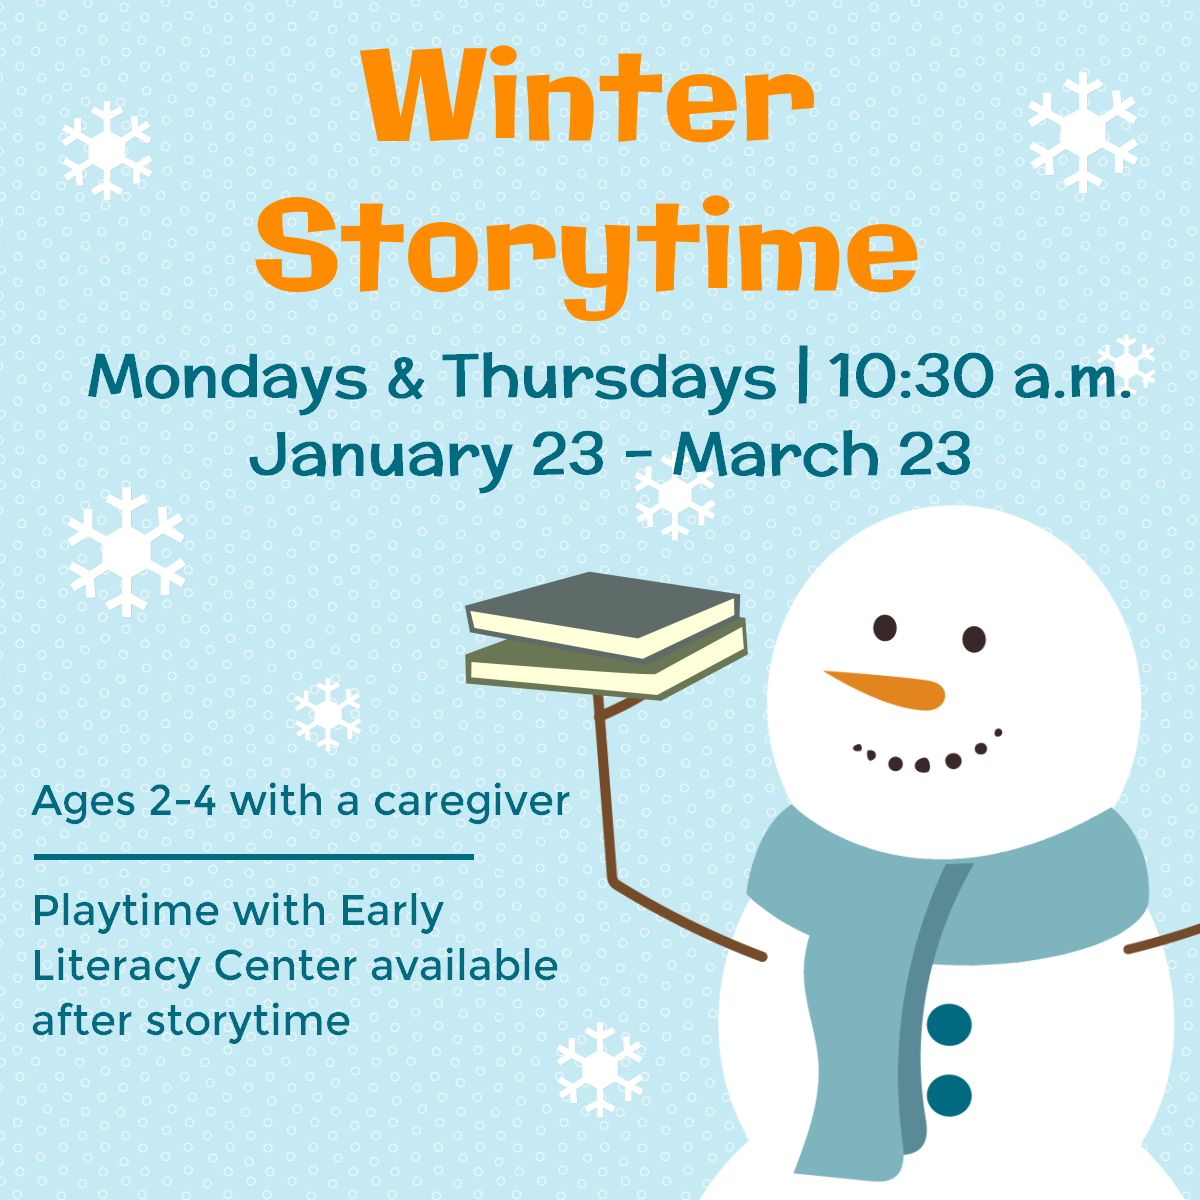 Winter storytime, Mondays and Thursdays at 10:30am January 23 - March 23. Ages 2-4 with a caregiver. Playtime with Early Literacy Center available after storytime